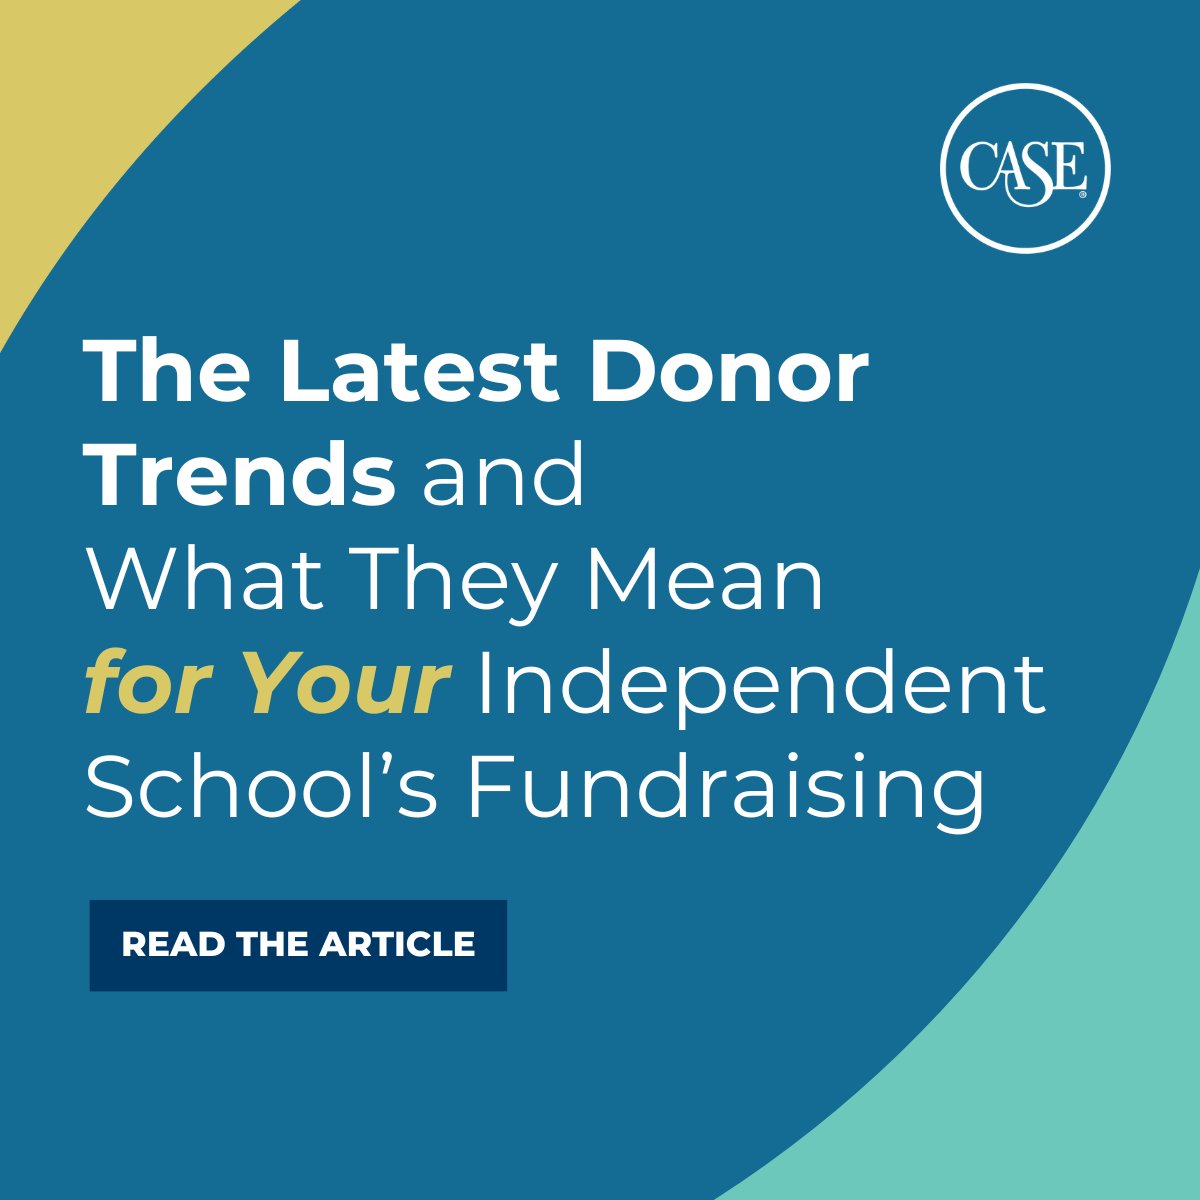 A recent collaborative study conducted by CASE and NAIS reveals emerging donation trends within boys’, girls’, and co-ed schools, signaling noteworthy shifts in independent school fundraising. Learn more: hubs.ly/Q027t5S20